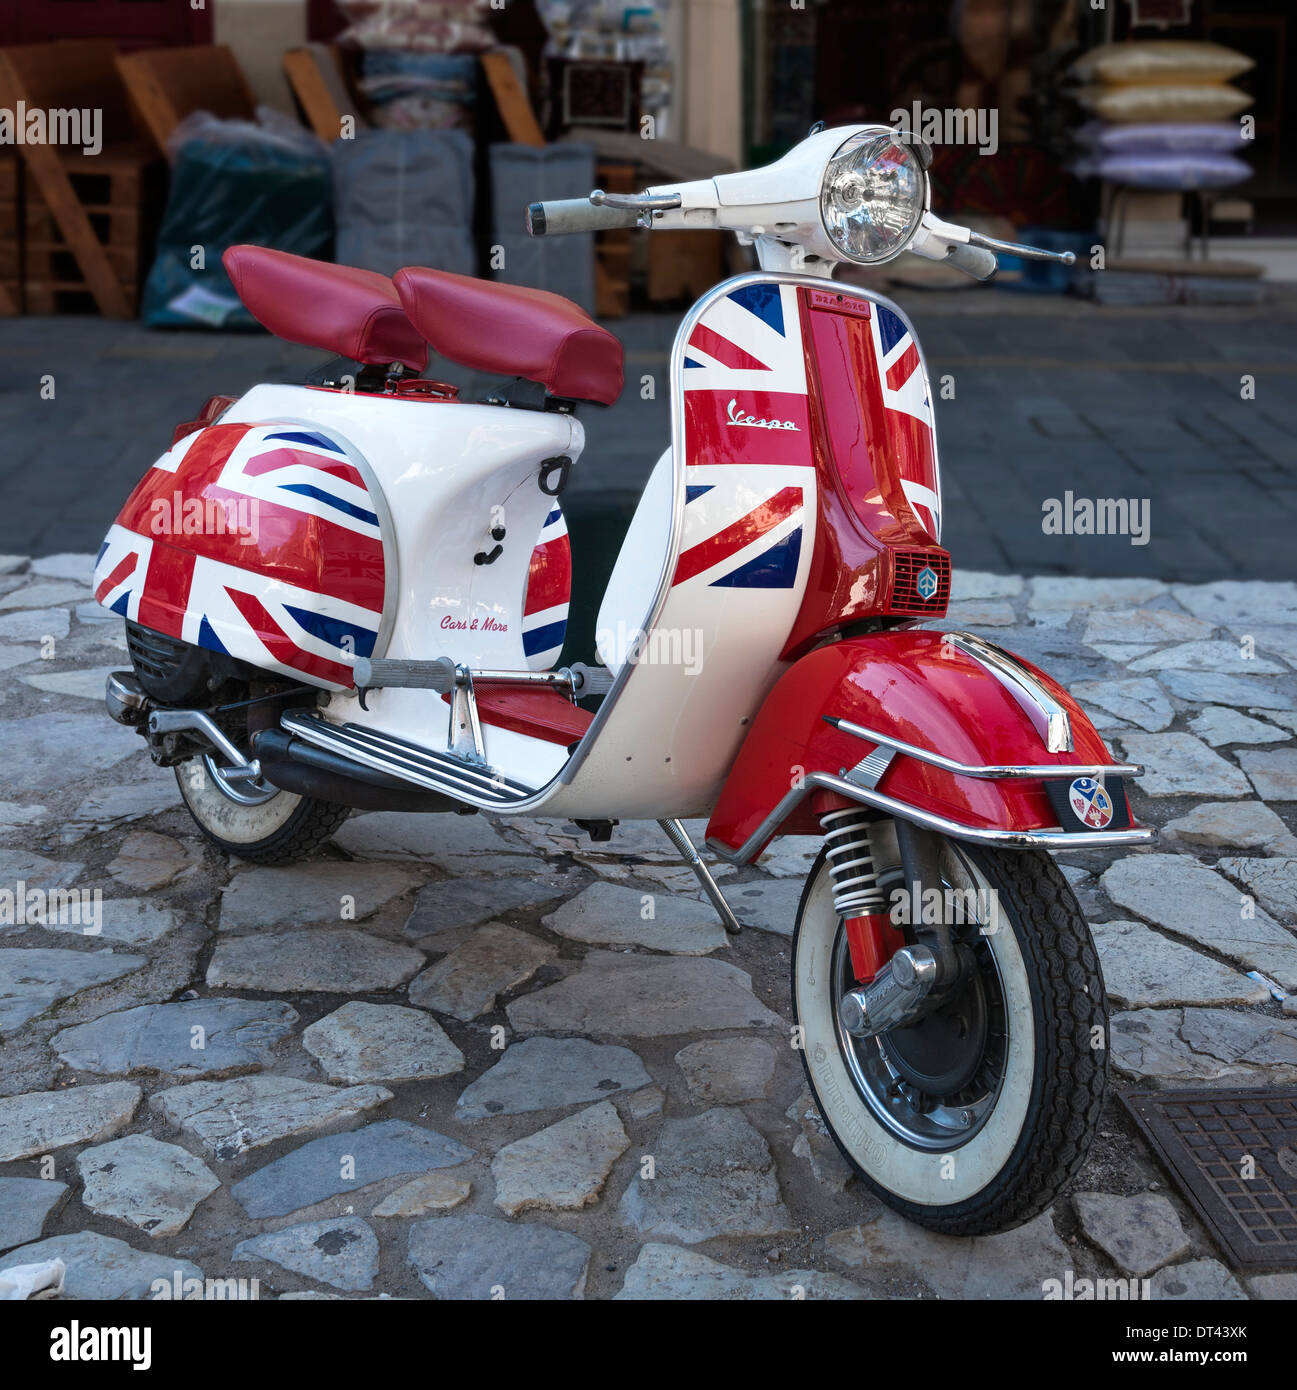 A Piaggio Vespa scooter, painted with the flag and colours of the Union  Jack, seen in Kalamata, Peloponnese, Greece Stock Photo - Alamy